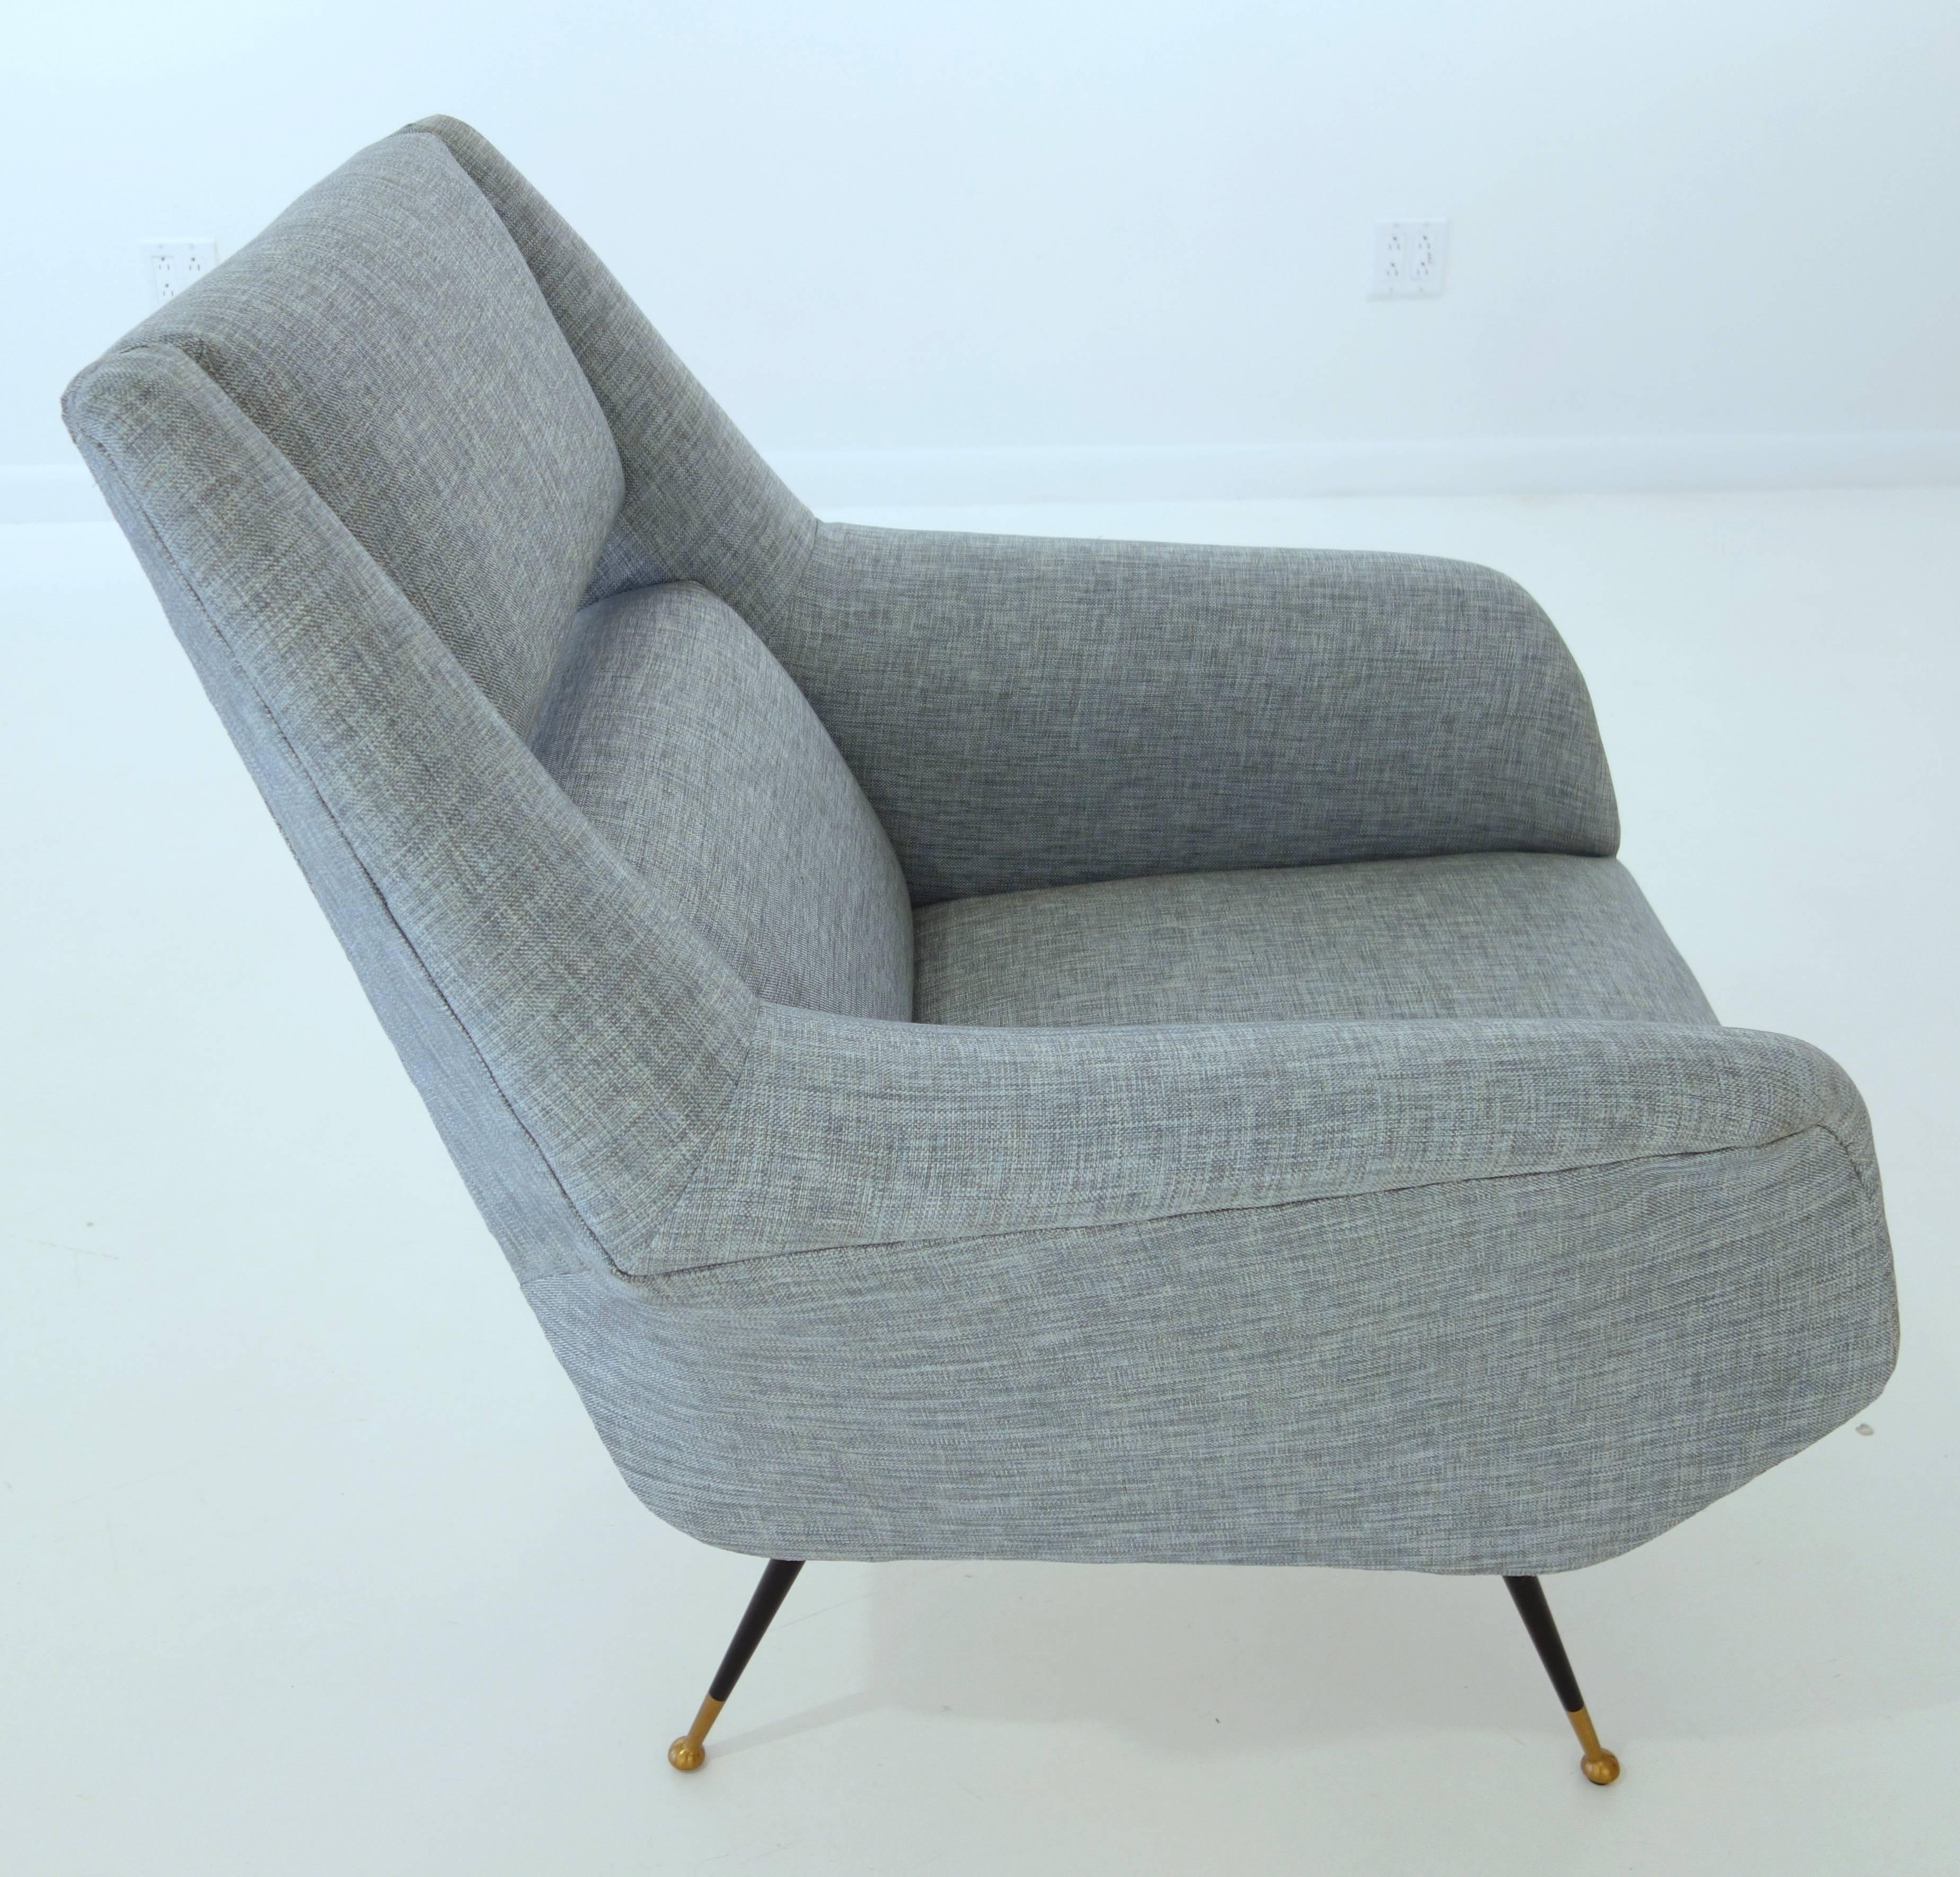 A pair of large Italian Mid-Century lounge or armchairs in the style of Carlo de Carli with cut-out backs and slightly flared arms with tight seats resting on black metal legs with brass caps newly upholstered in woven slate blue fabric with a